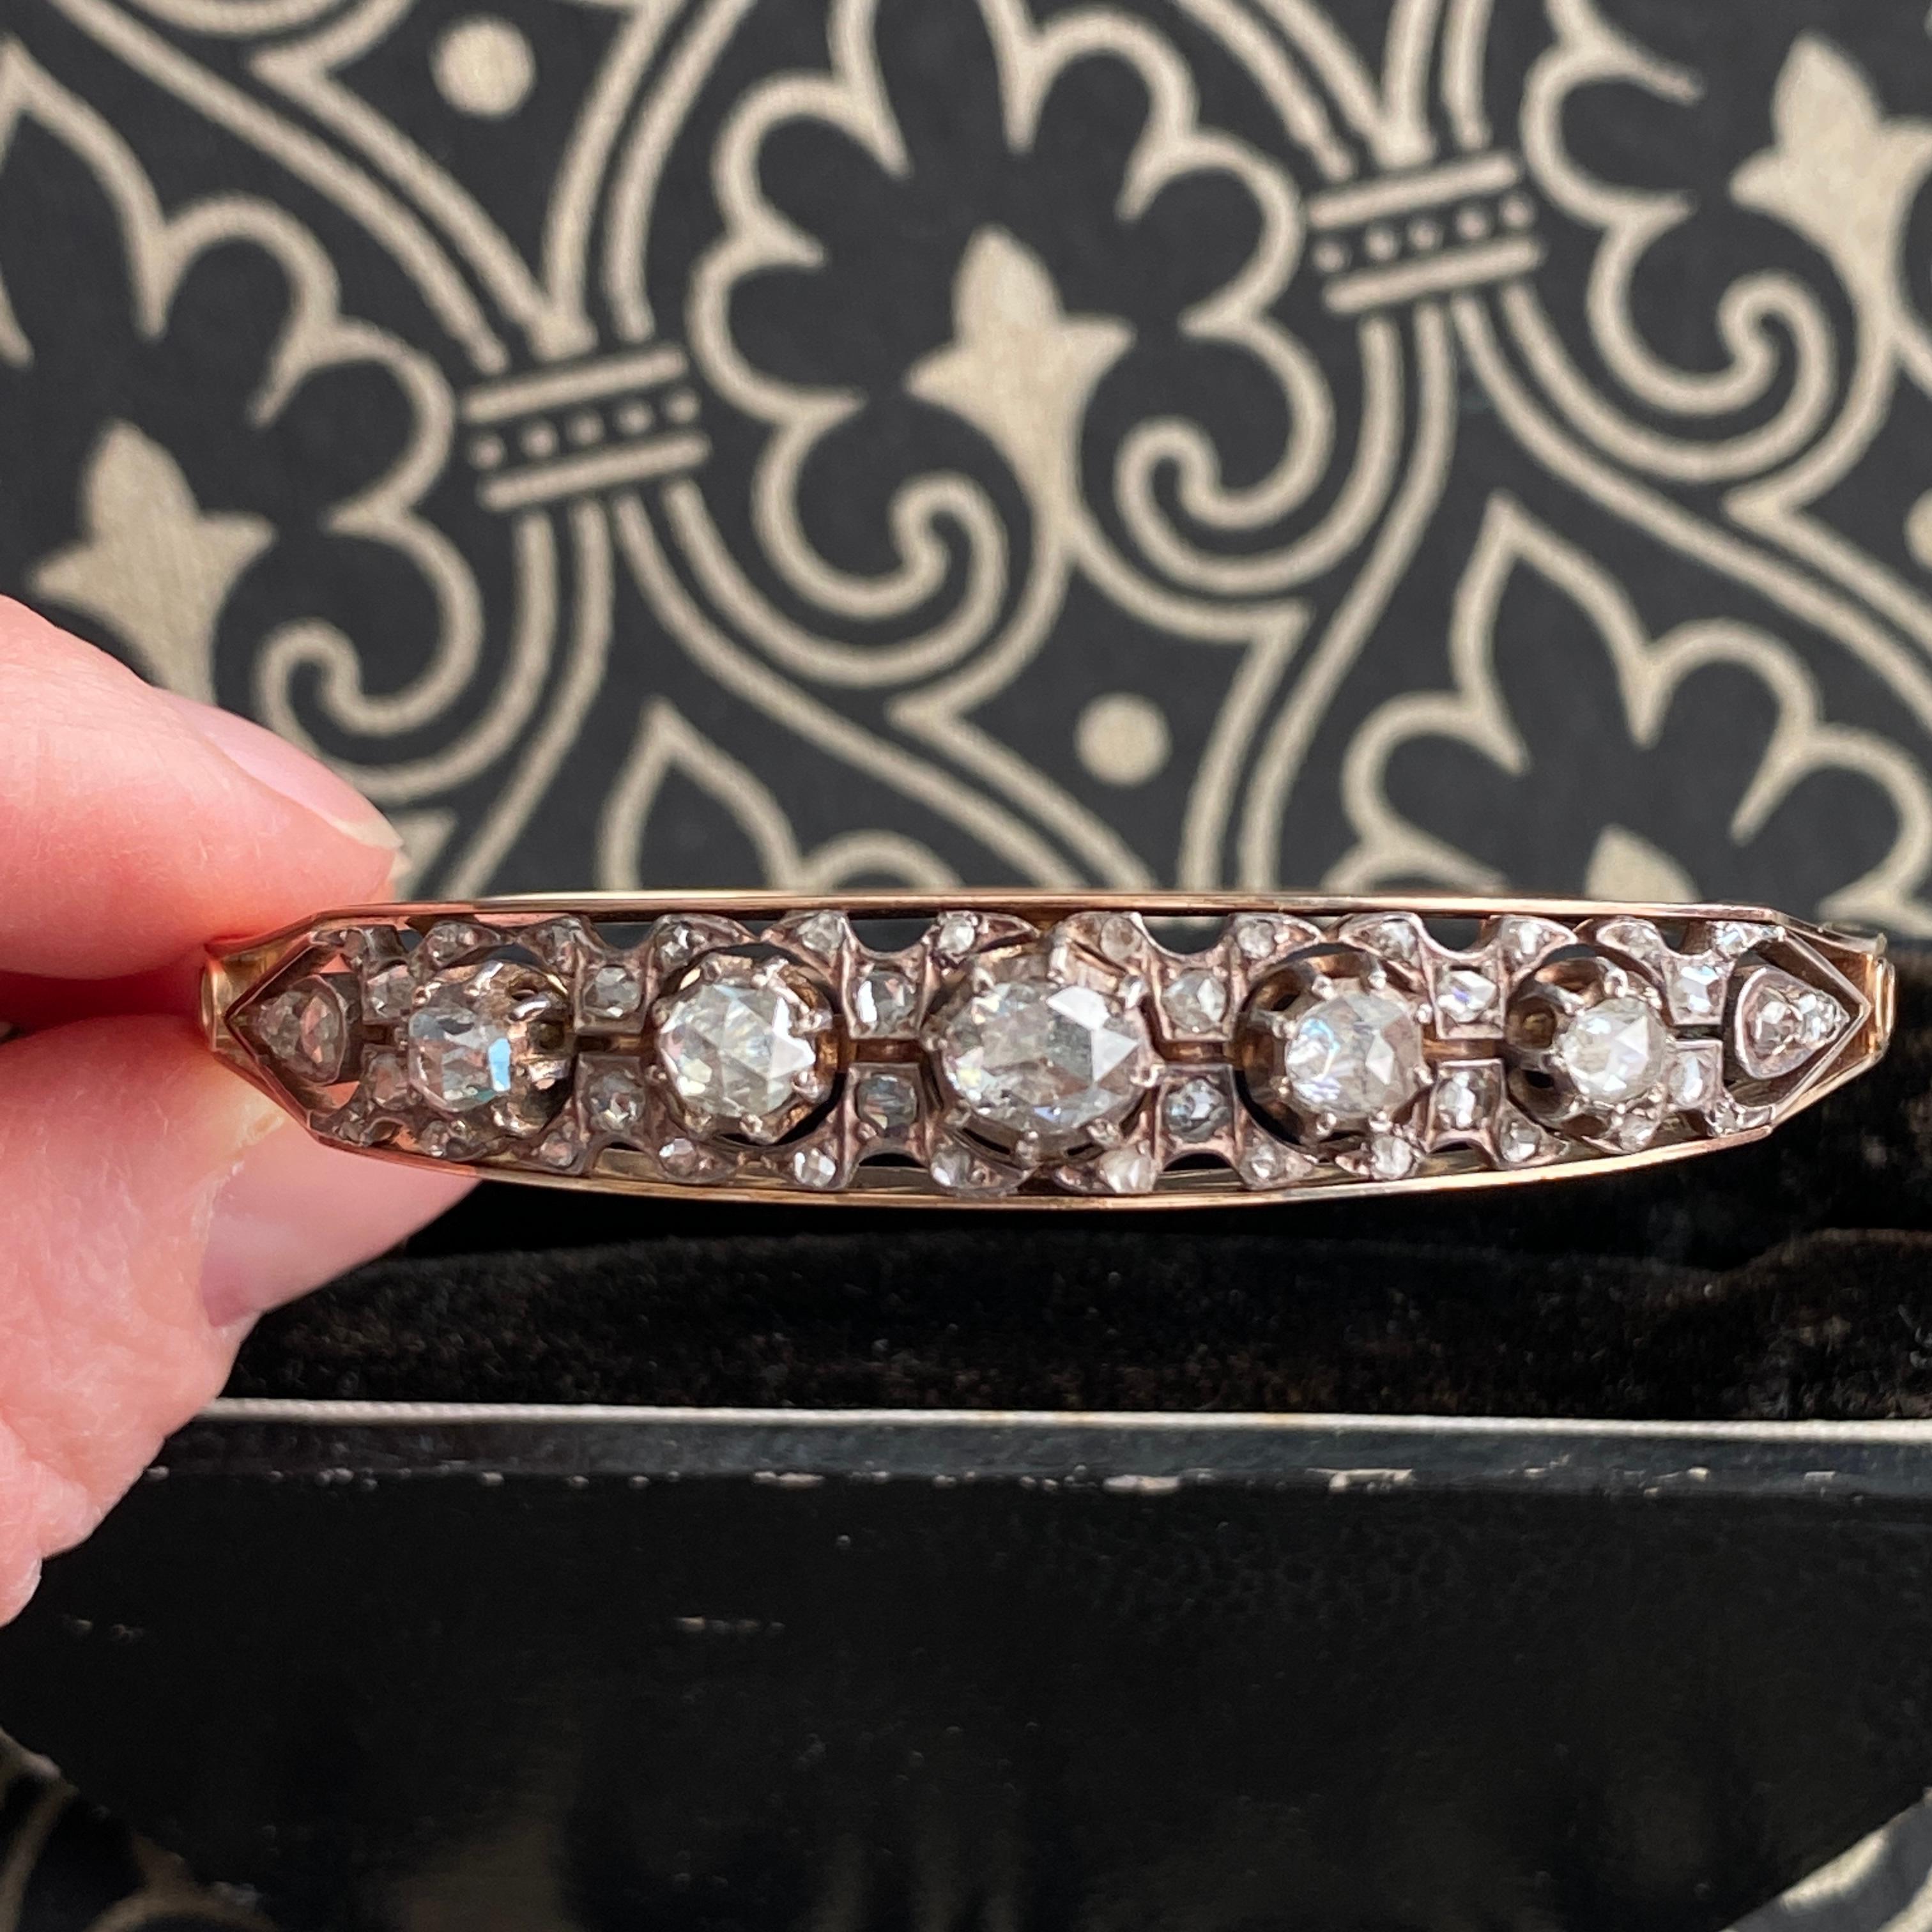 Details:
Beautiful antique rose cut diamond bangle bracelet in 18K rose gold. Set across the top, in cast mountings emulating the Georgian Style are five rose cut diamonds, weighing approximately 1.26 carats combined total weight with G-H-I color